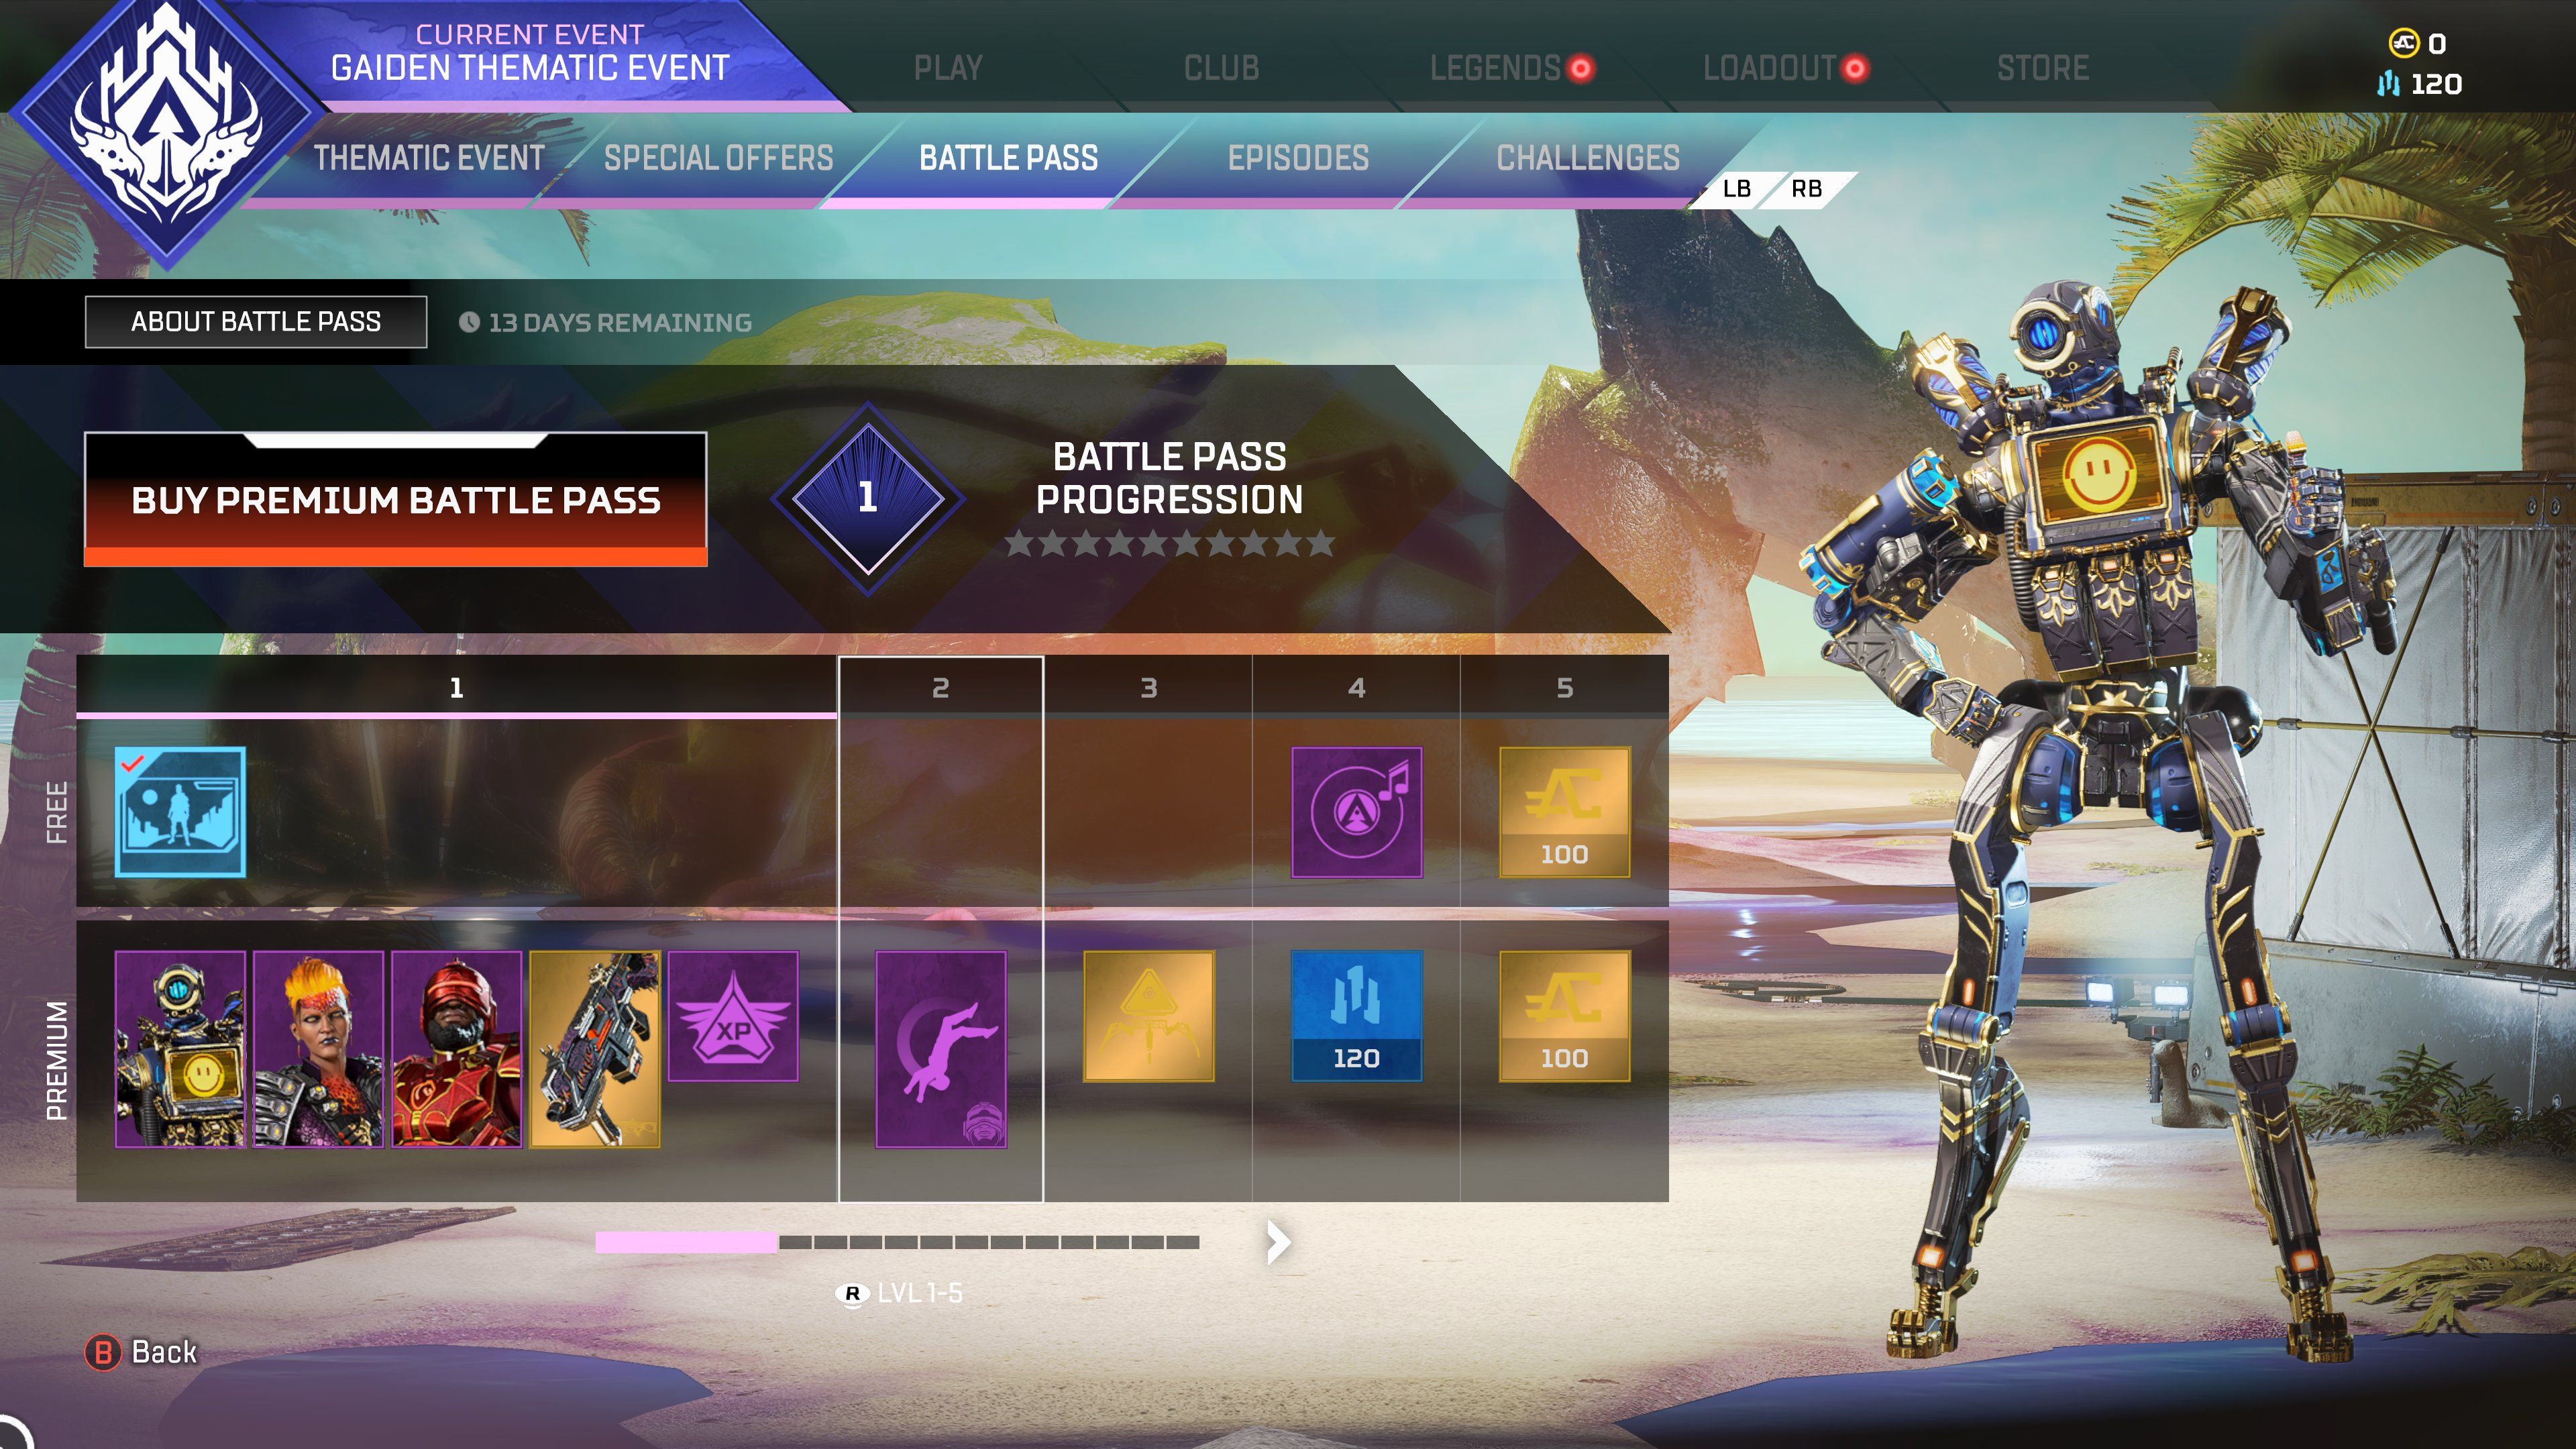 The tiers of an Apex Legends battle pass with the premium unlocks highlighted